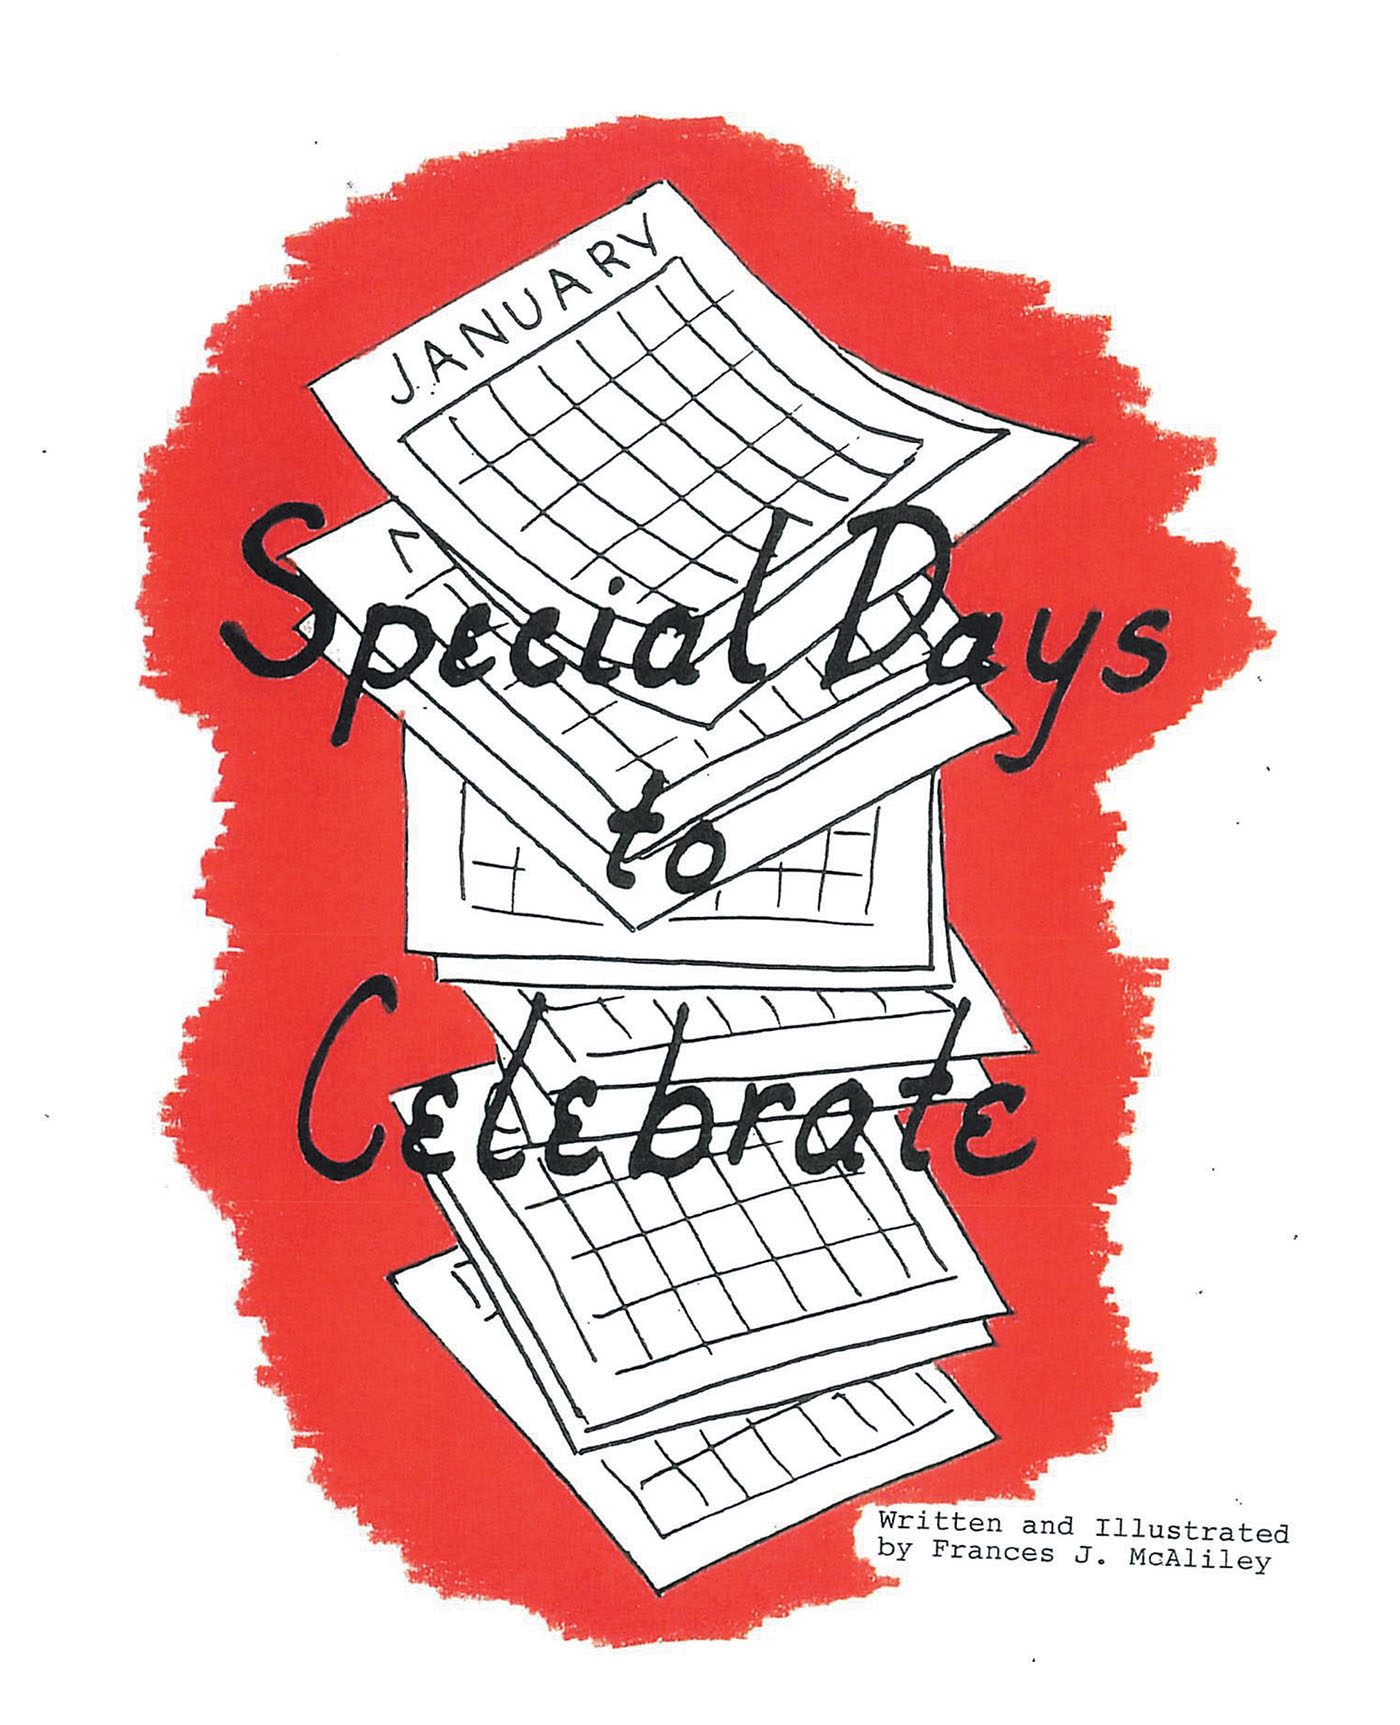 Frances J. McAliley’s New Book "Special Days to Celebrate" is a Guide to Help Young Readers Learn the Many Holidays Celebrated in America & Why & How They Are Celebrated